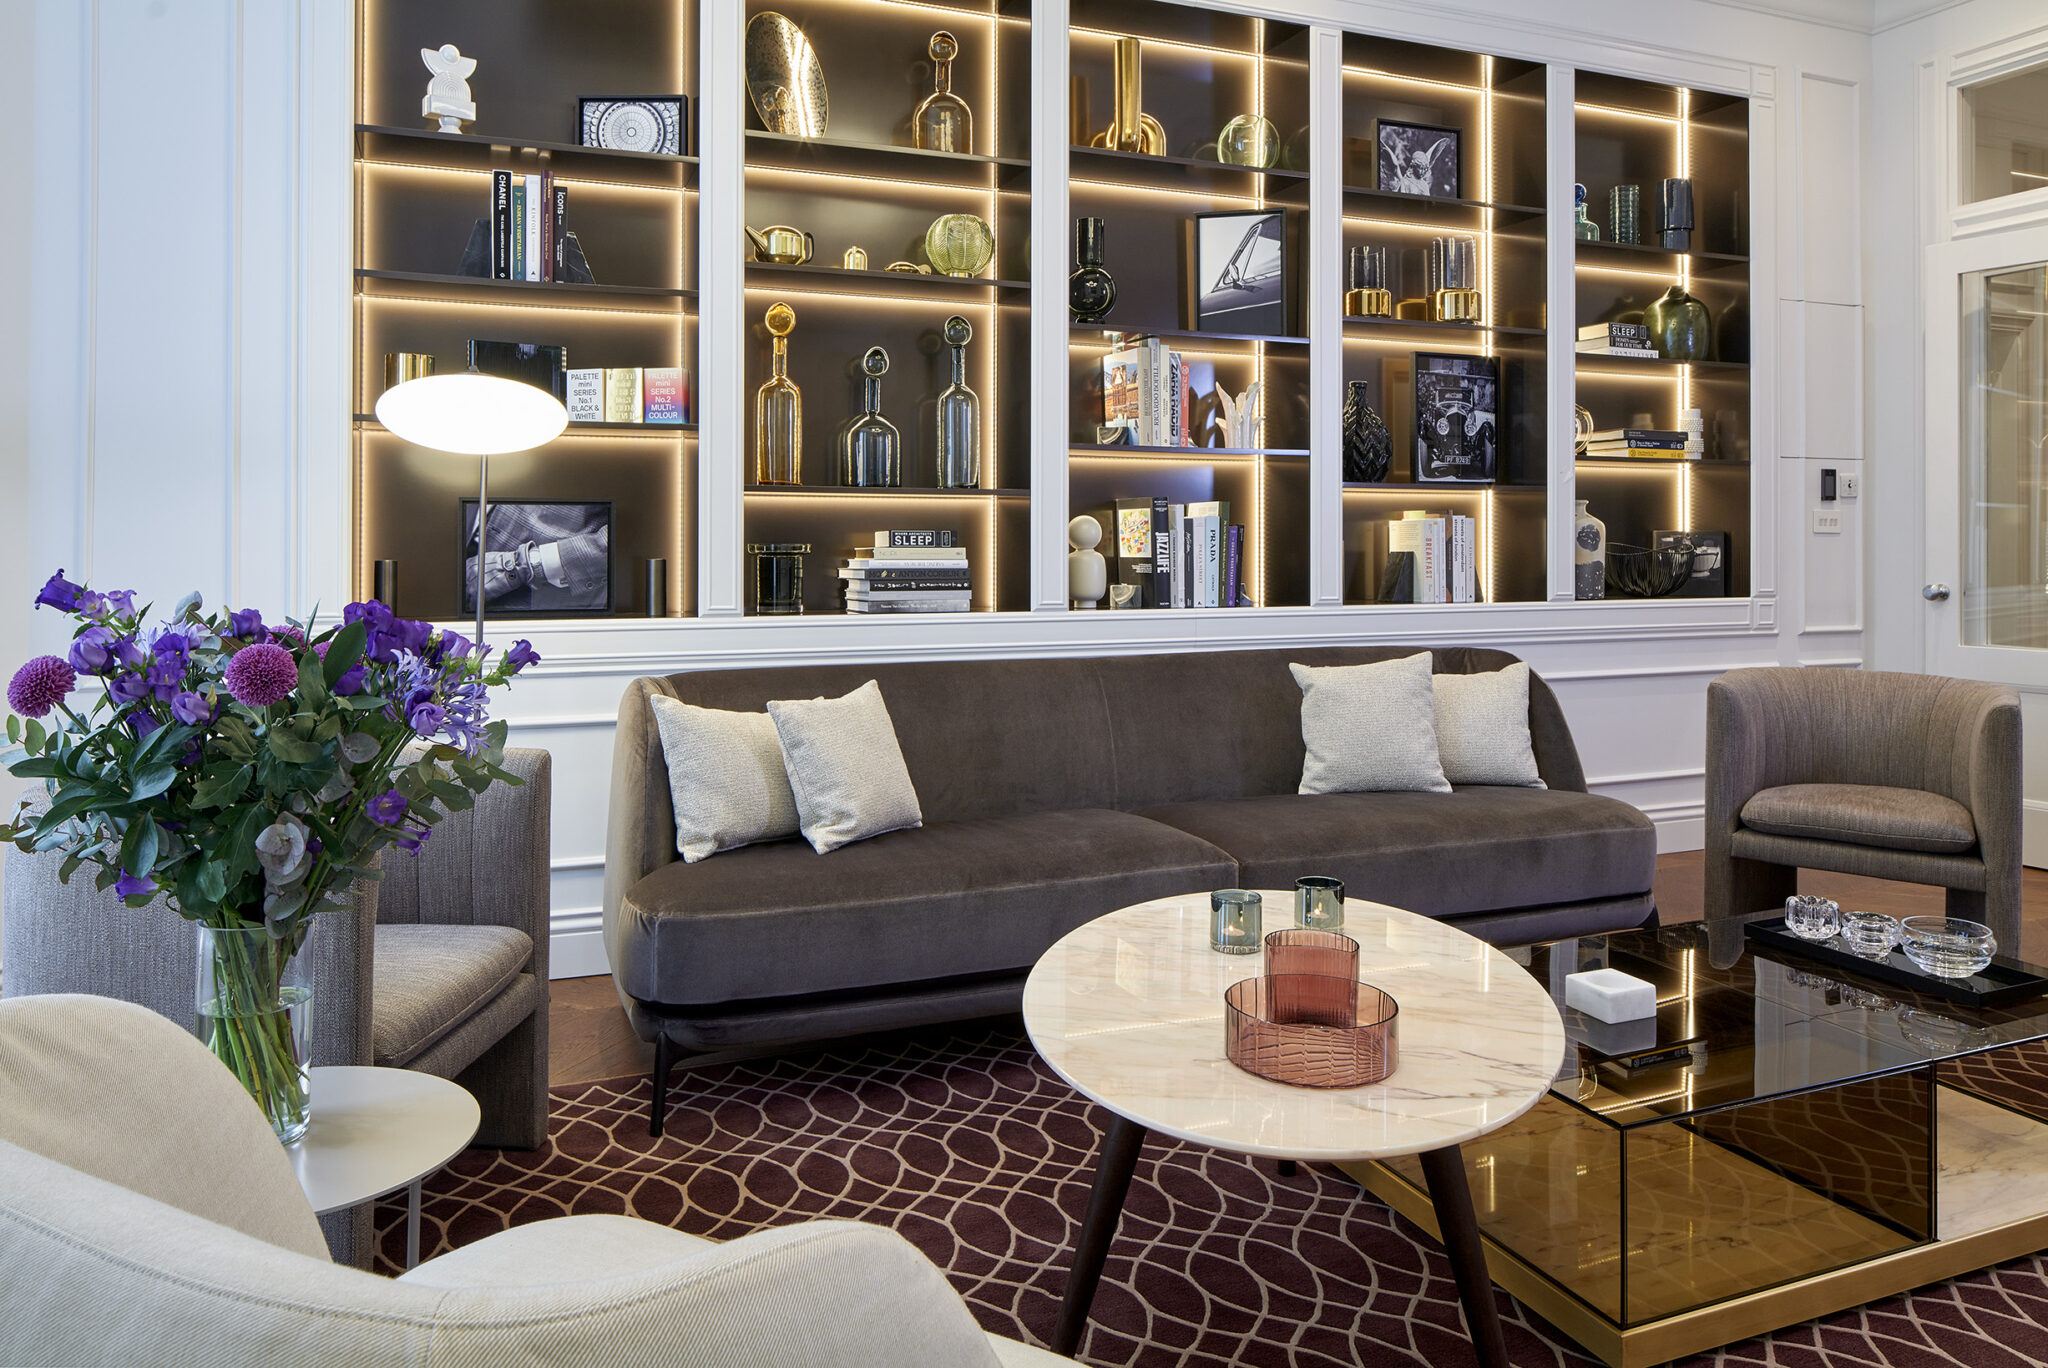 Looking for Luxury Accommodation Kensington? Our Lexham Gardens Luxury Serviced Apartments in Central London are available now for short lets! urban Stay